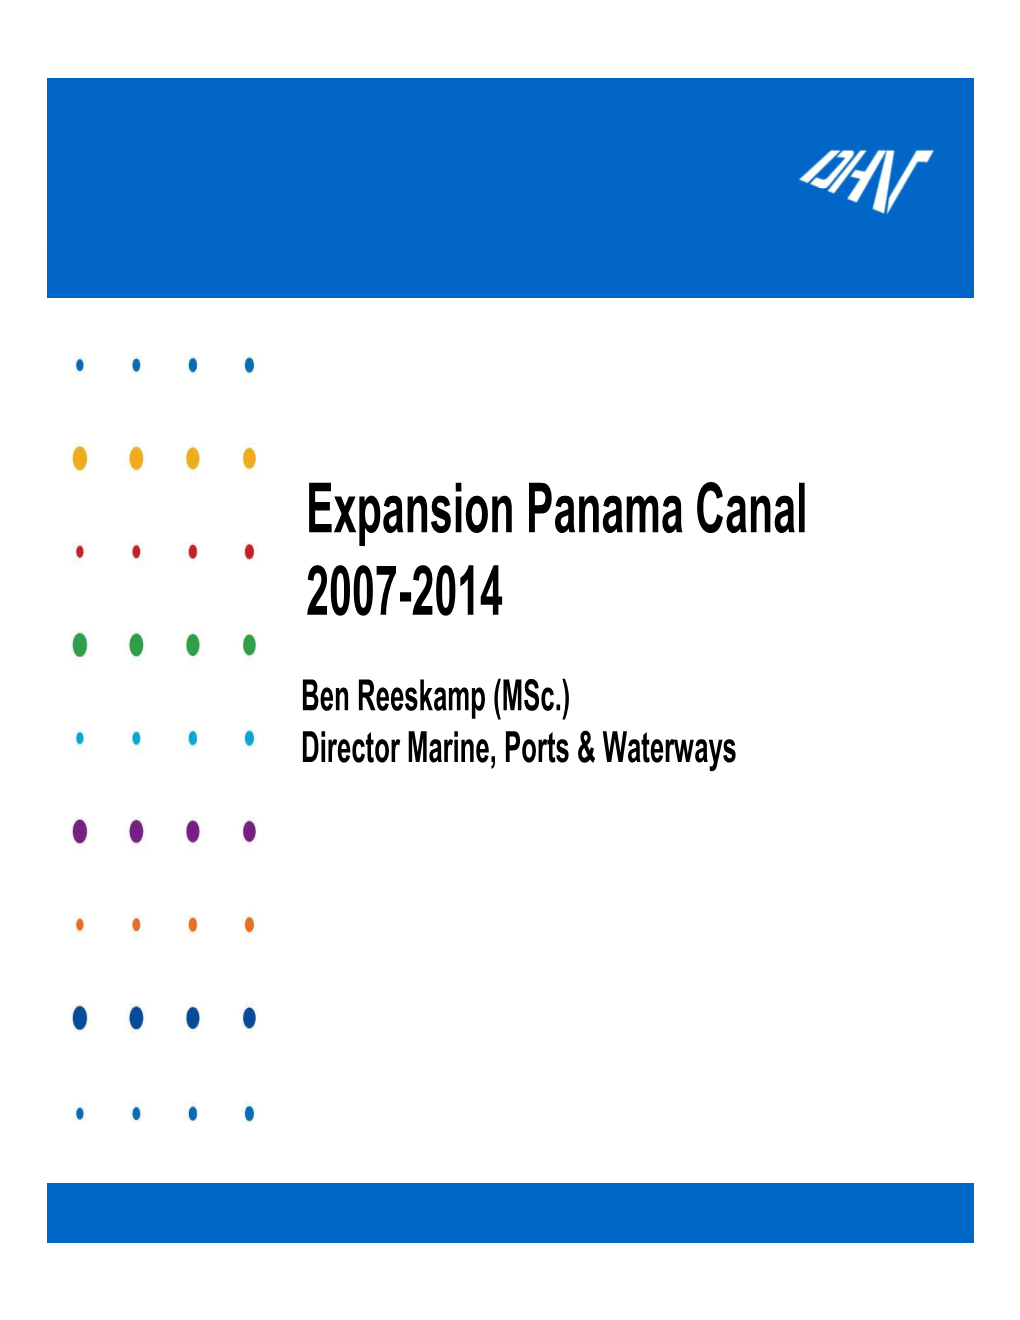 Expansion Panama Canal 2007-2014